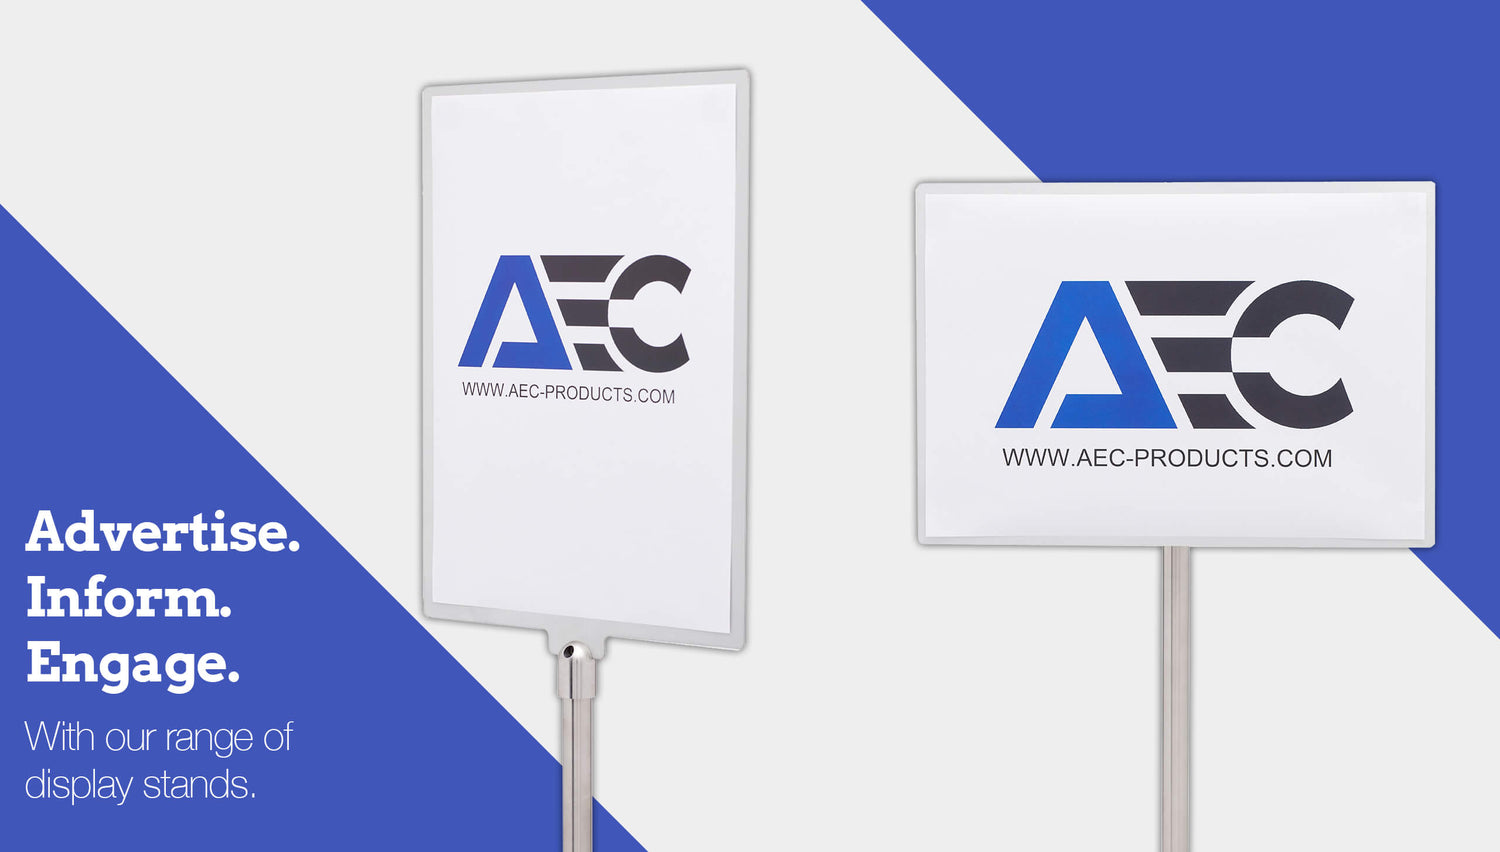 Our range of display stands help you advertise, inform and engage